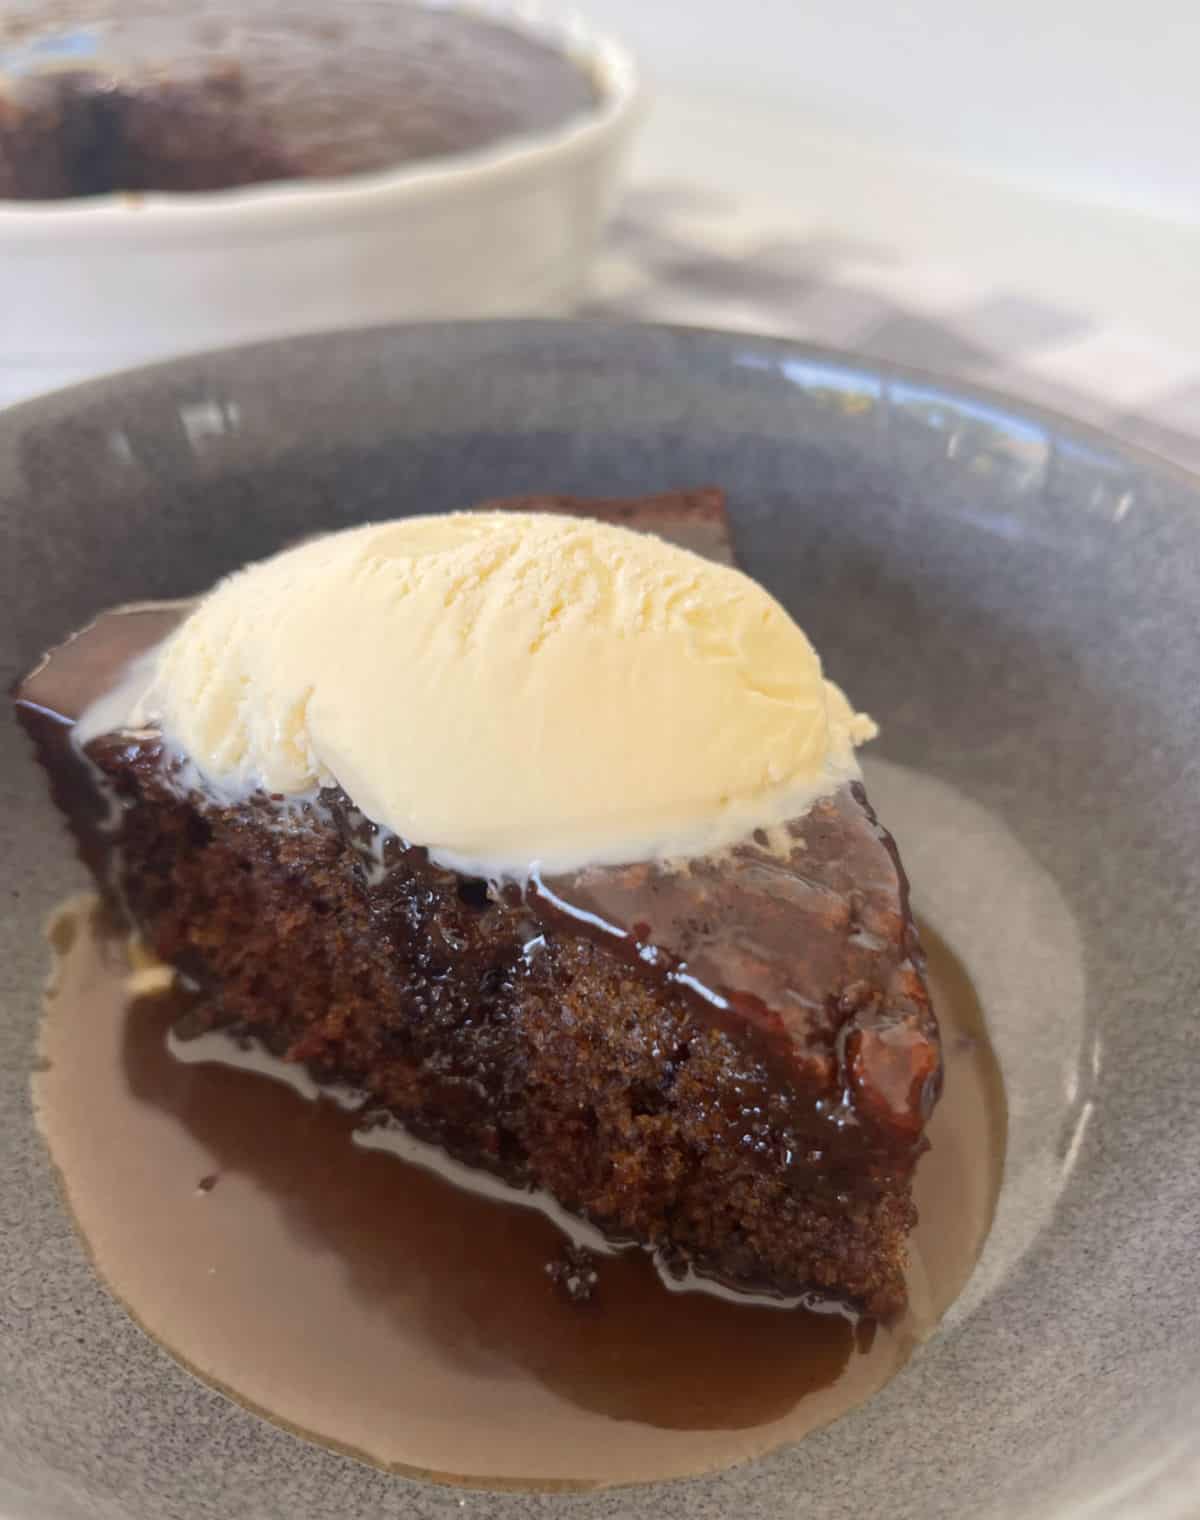 Piece of Sticky Date Pudding in a grey speckled bowl with caramel sauce and topped with ice cream.